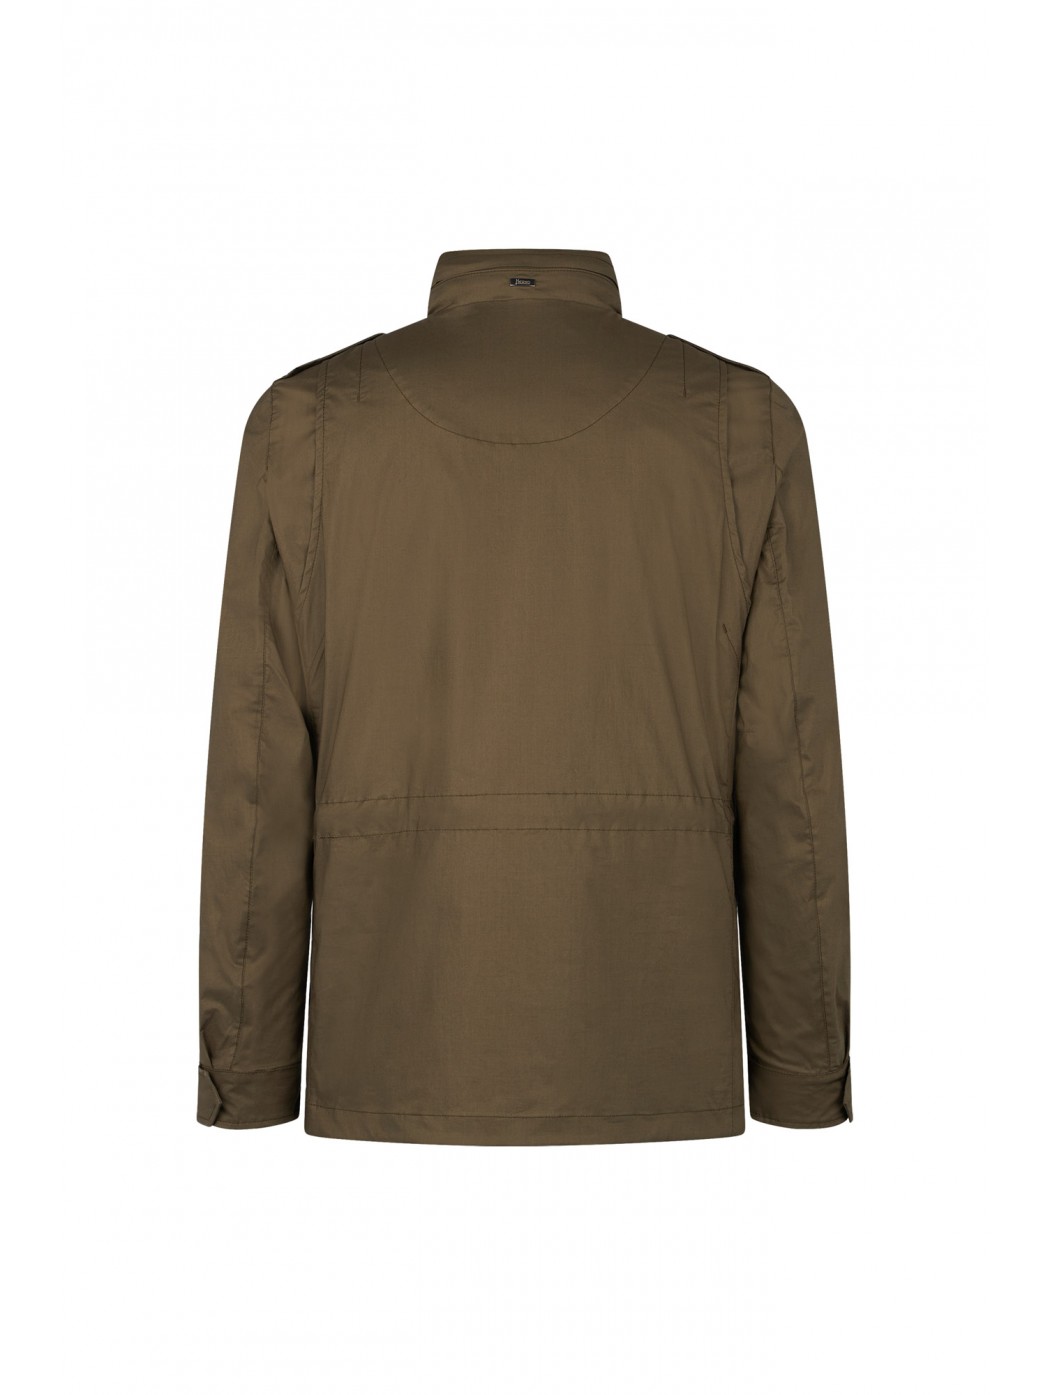 FIELD JACKET IN LIGHT COTTON STRETCH  HERNO